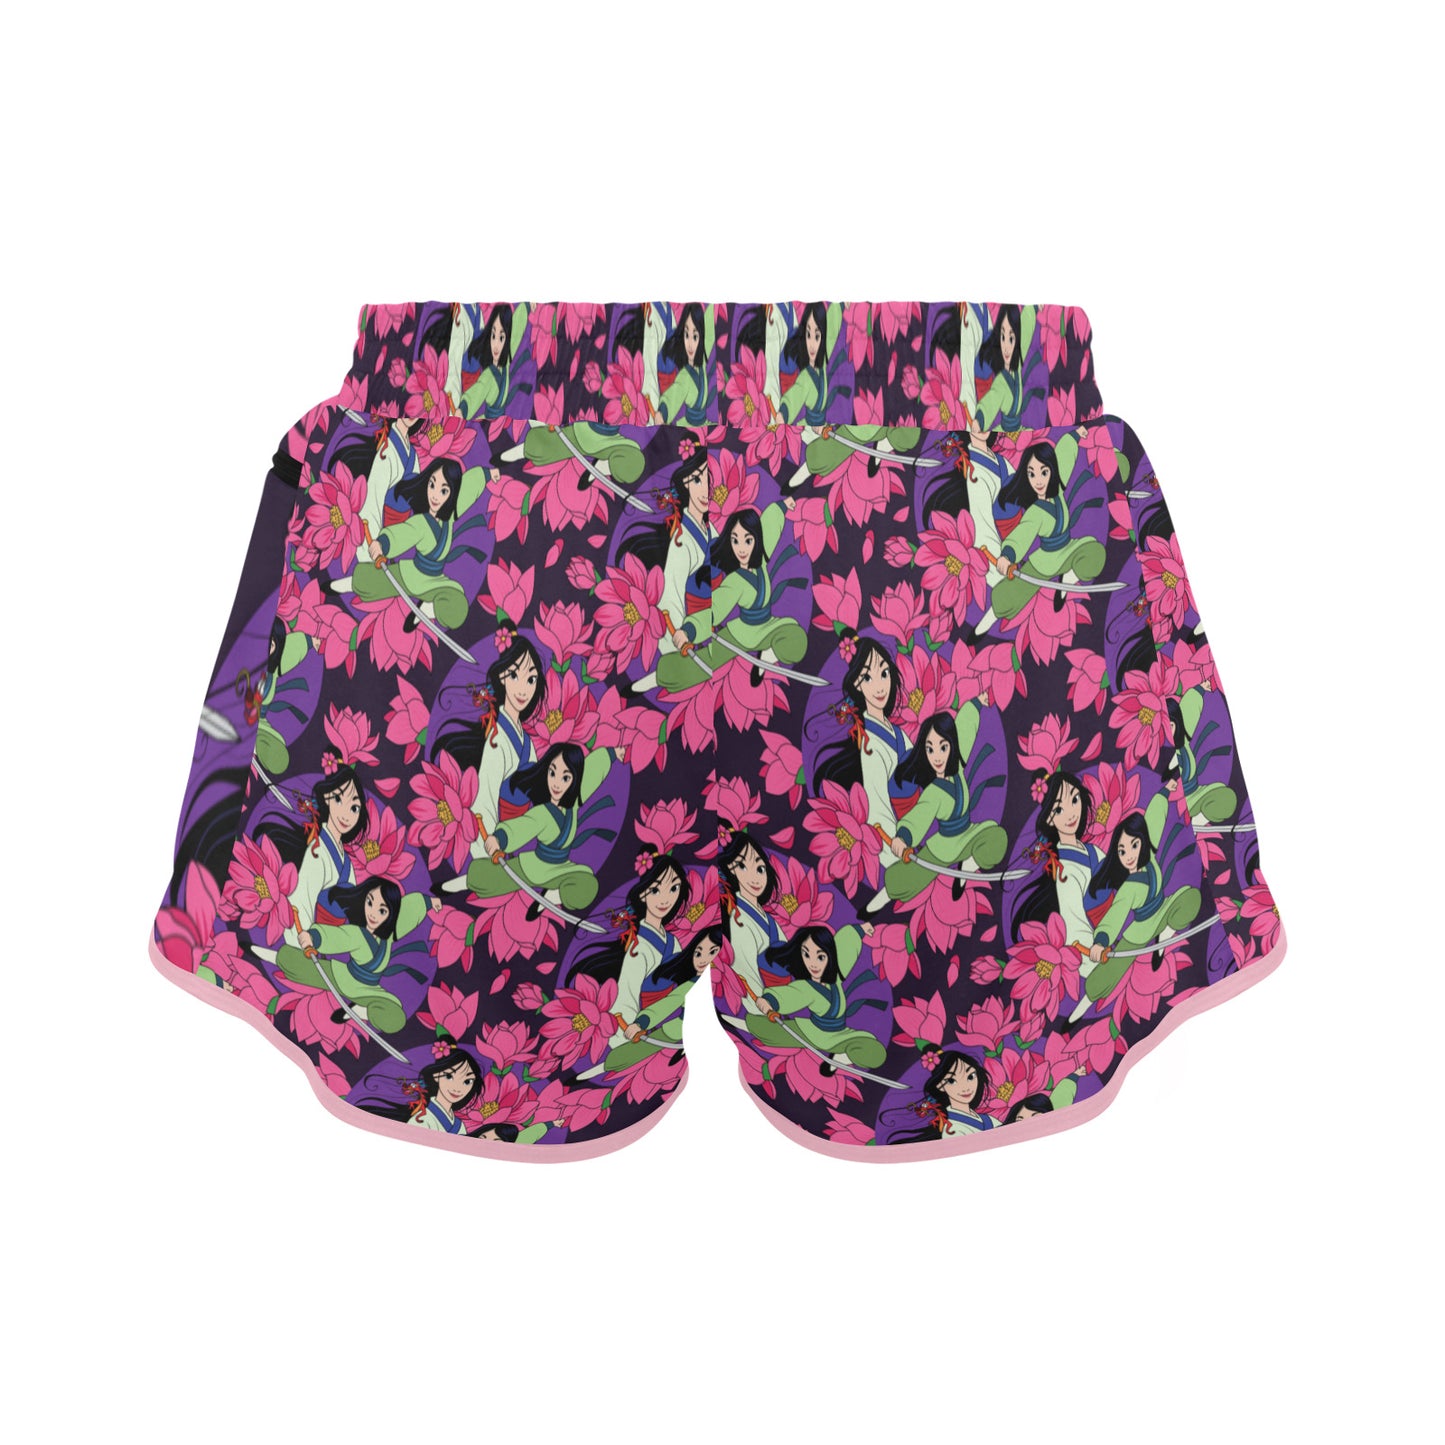 Blooming Flowers Women's Athletic Sports Shorts